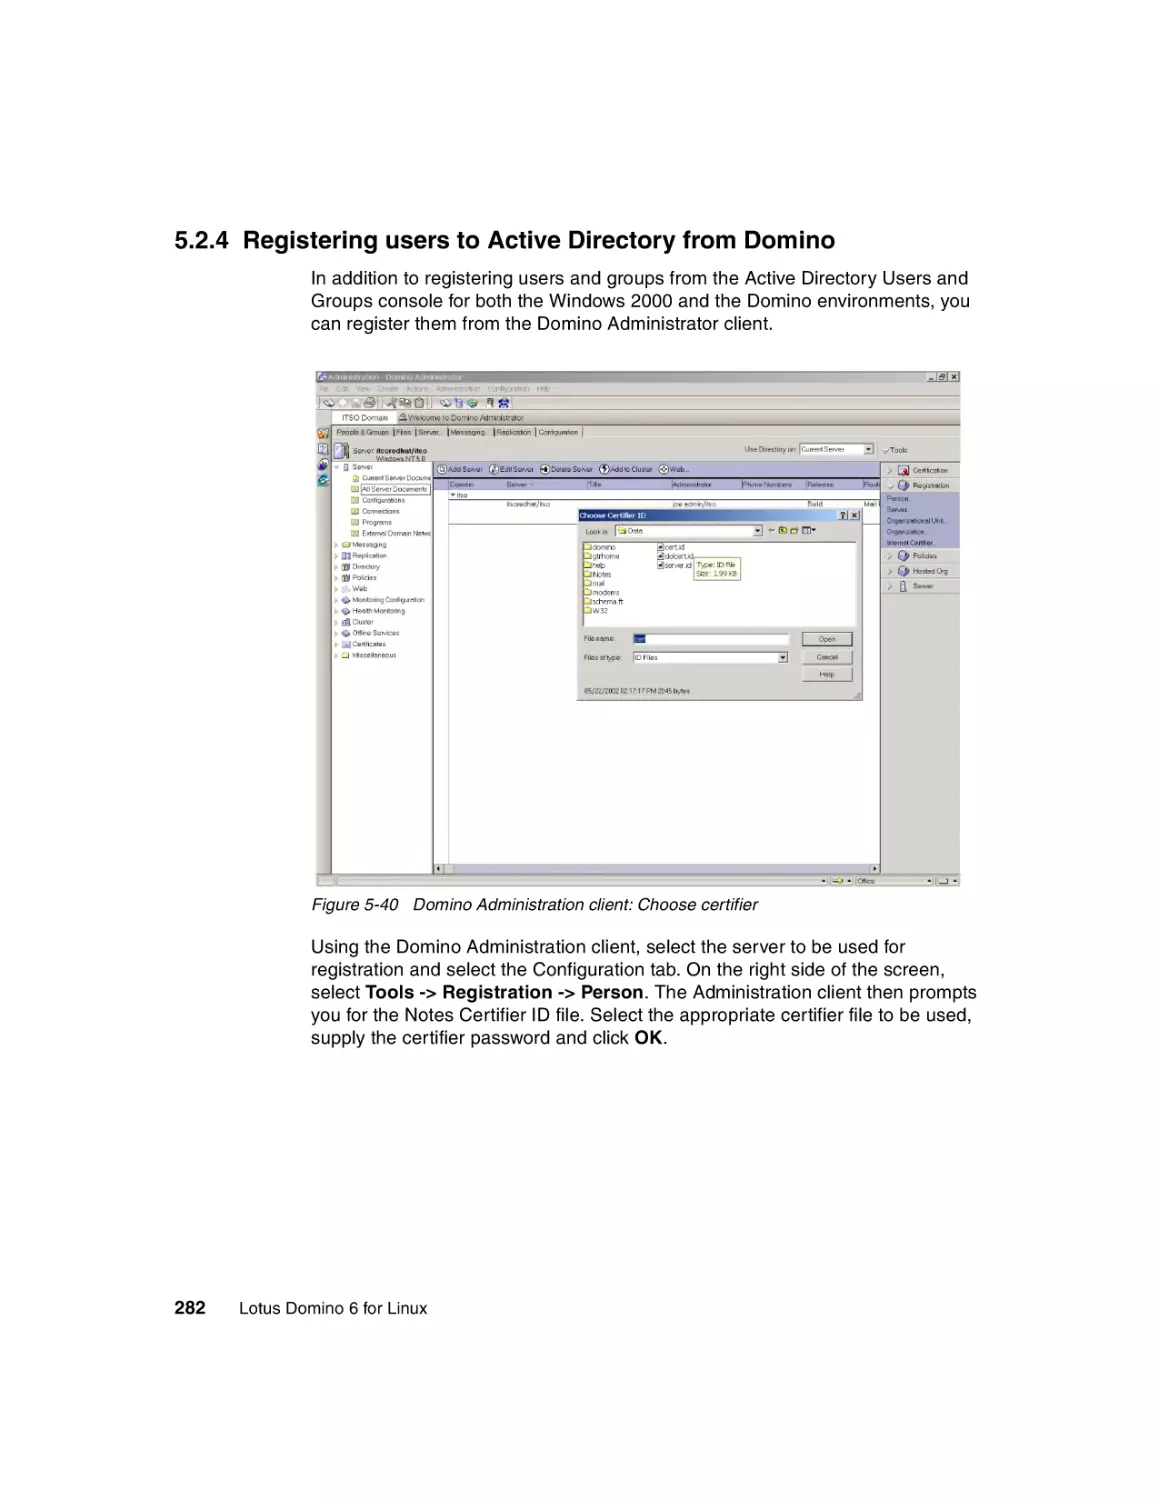 5.2.4 Registering users to Active Directory from Domino